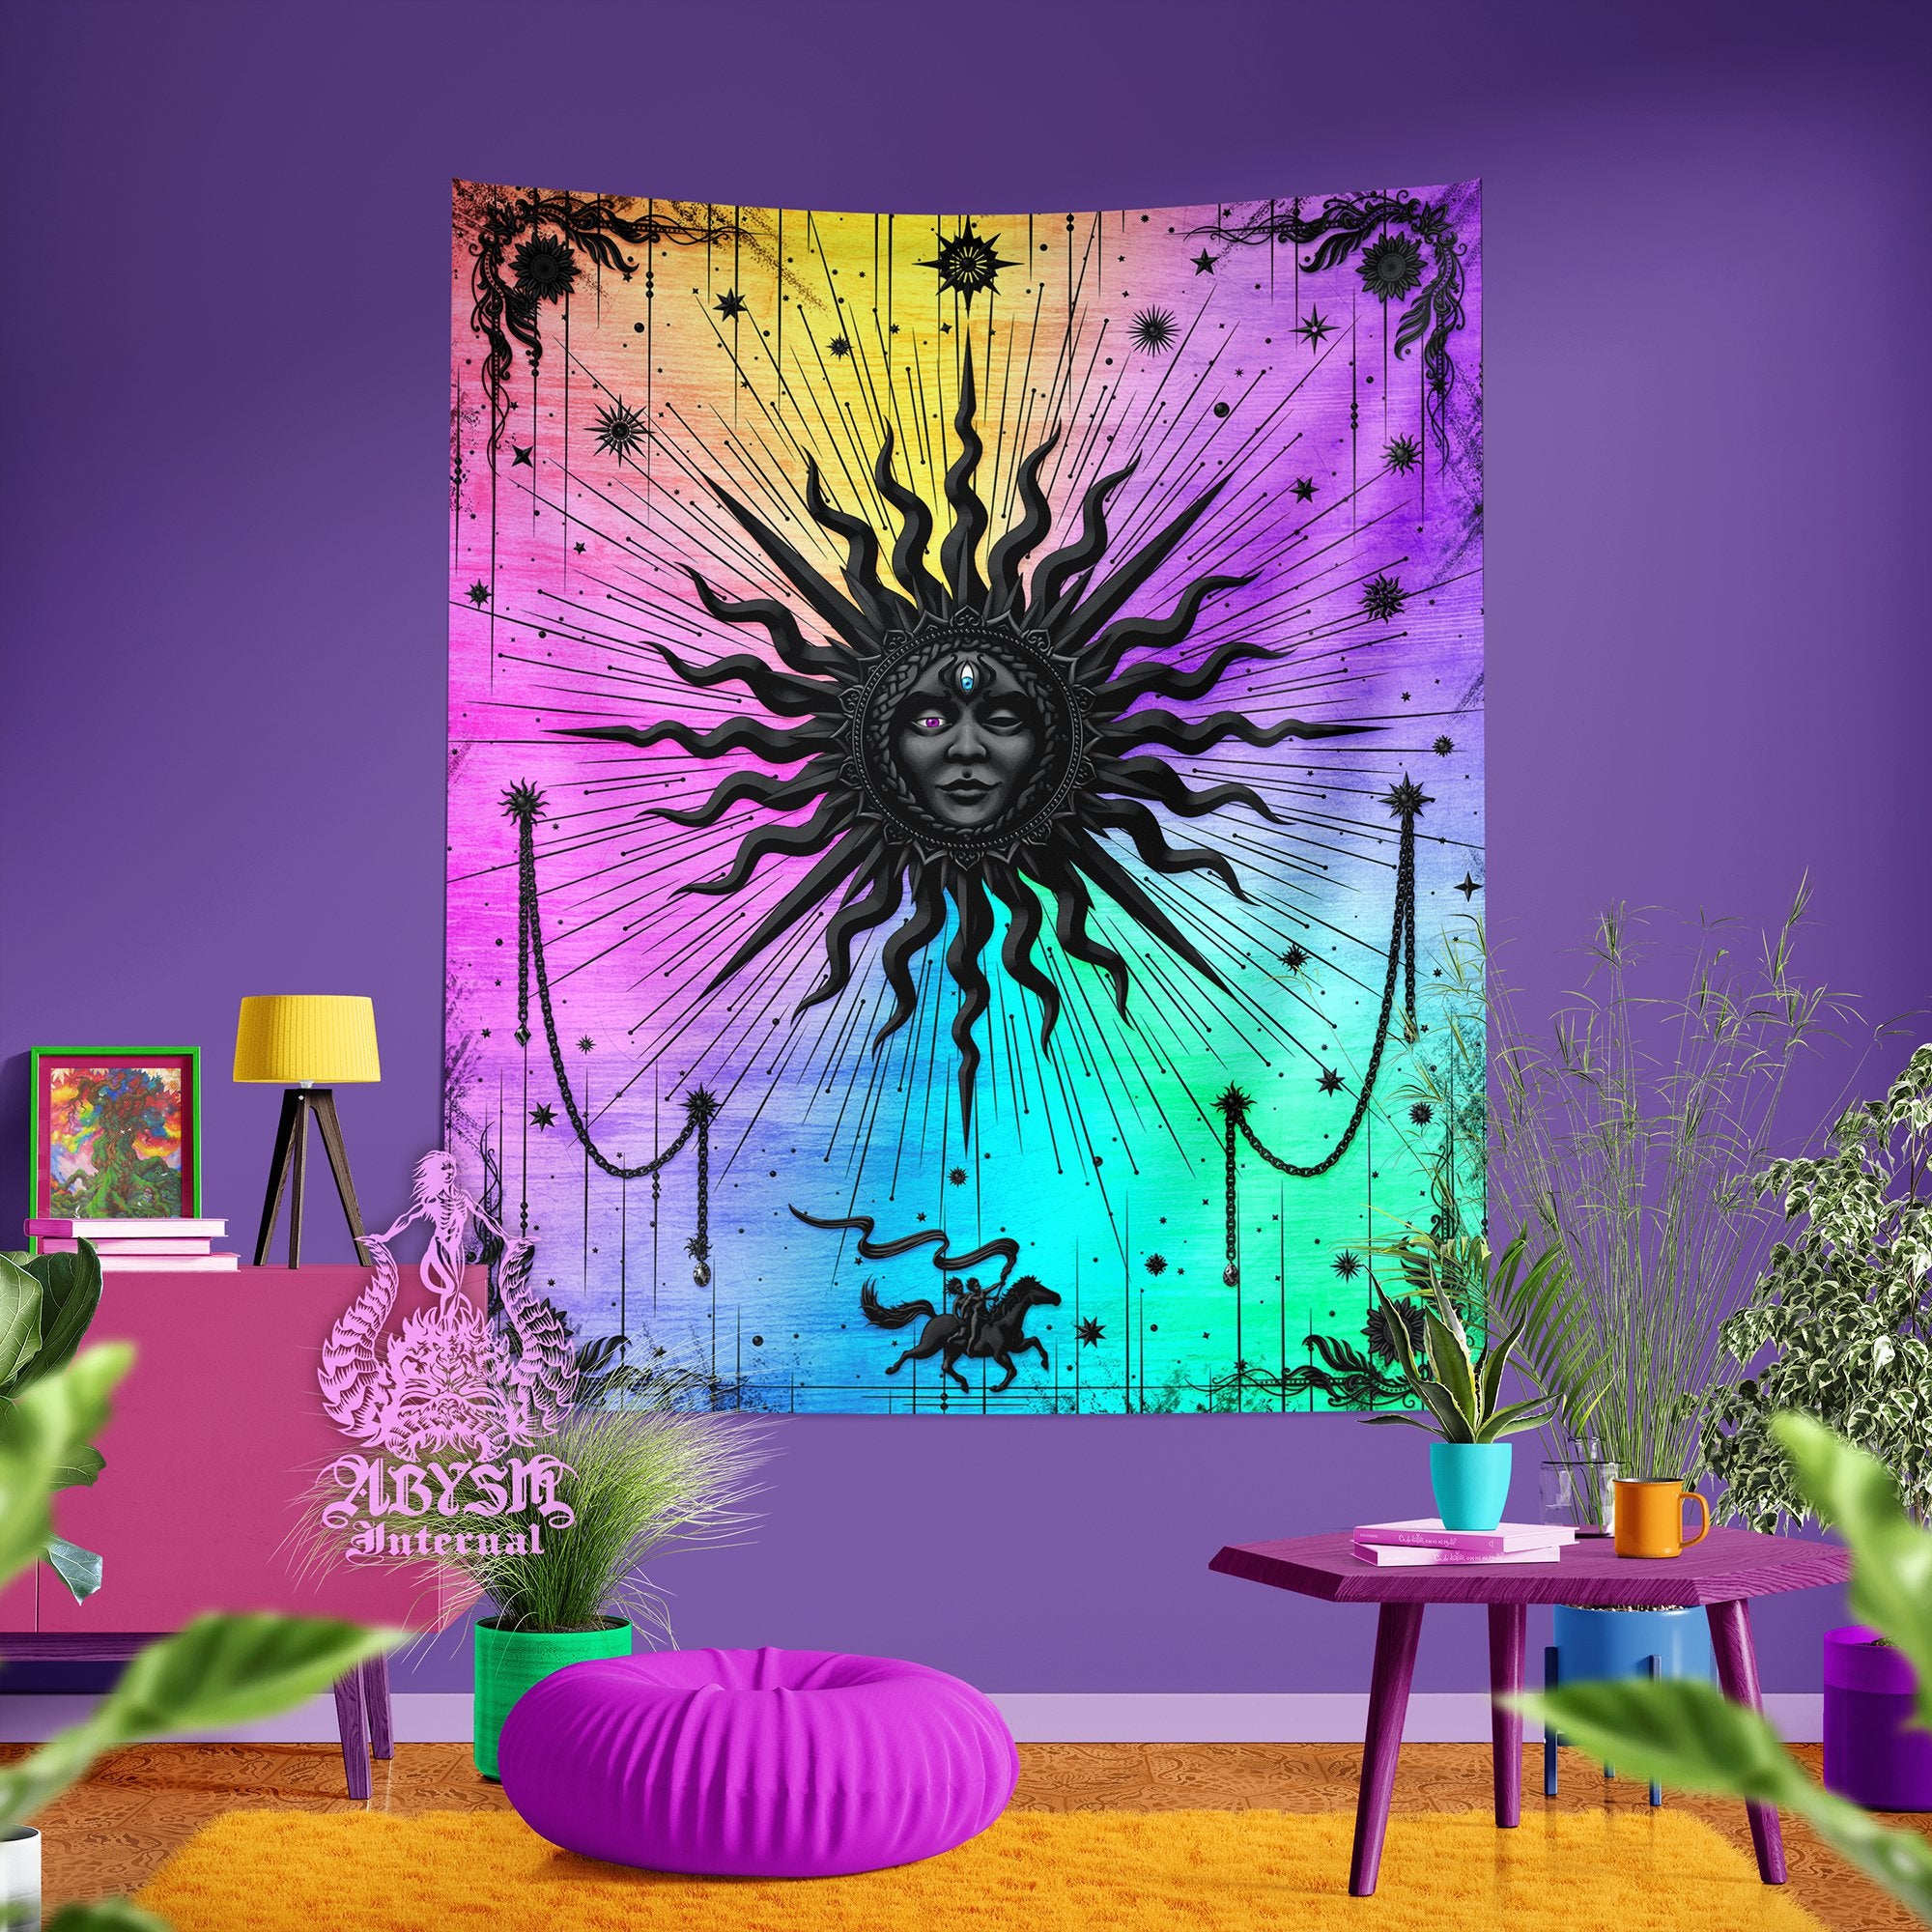 Psychedelic Sun Tapestry, Trippy Tarot Card Arcana Wall Hanging, Magic and Esoteric Art, Boho and Indie Home Decor, Vertical Print - Pastel Black - Abysm Internal